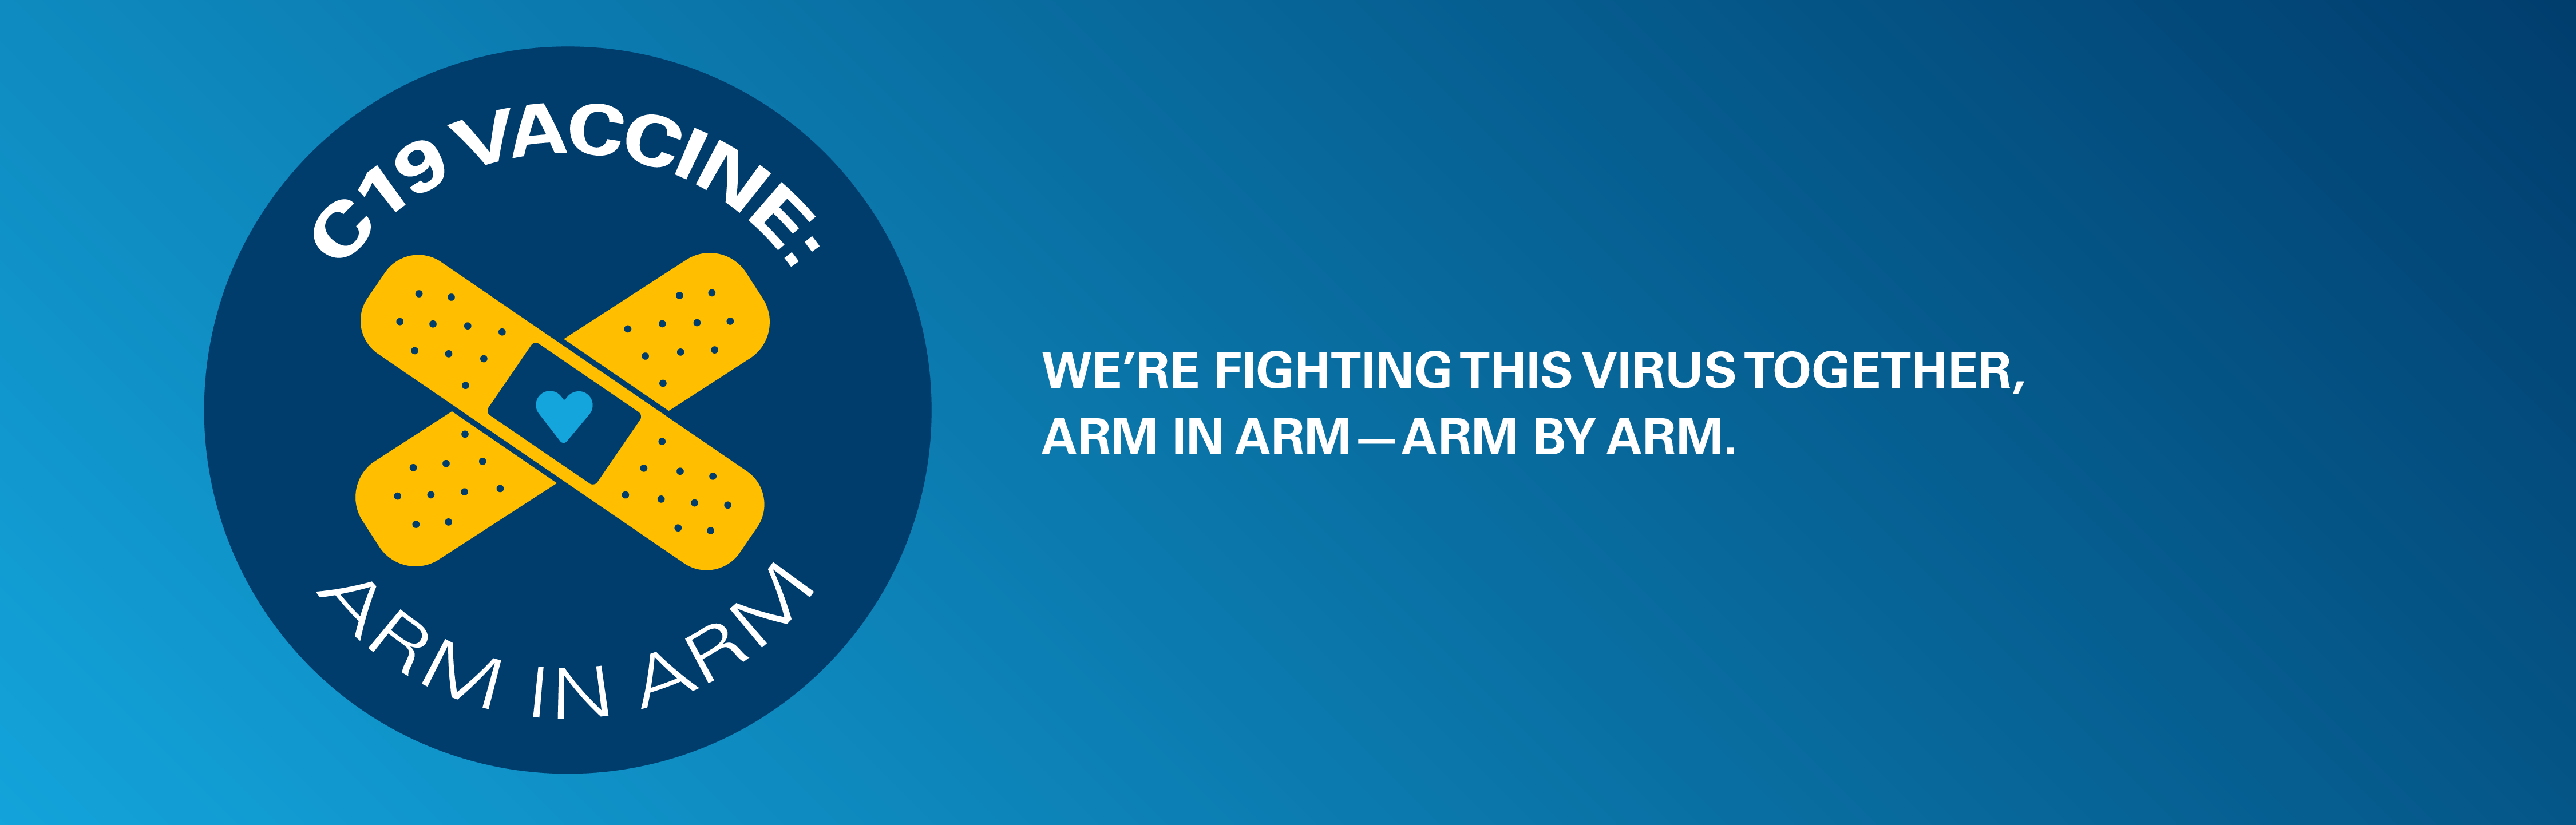 C19 Vaccine: Arm in Arm - We're fighting this virus together, Arm in Arm - Arm by Arm